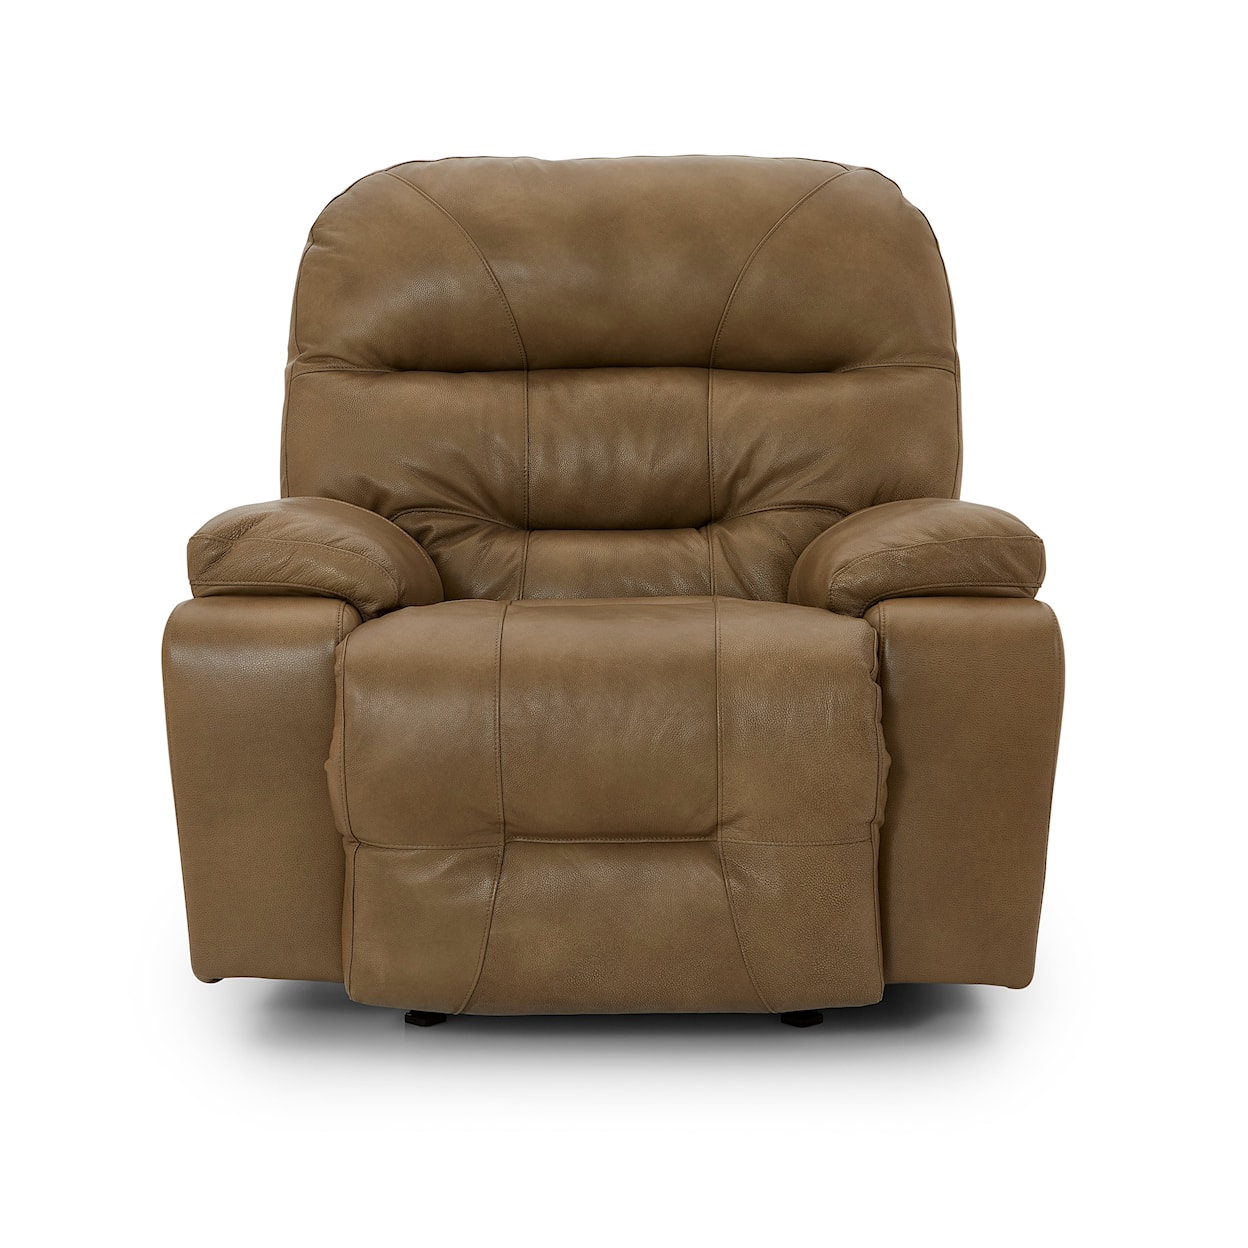 Best Home Furnishings Ryson Power Space Saver Recliner